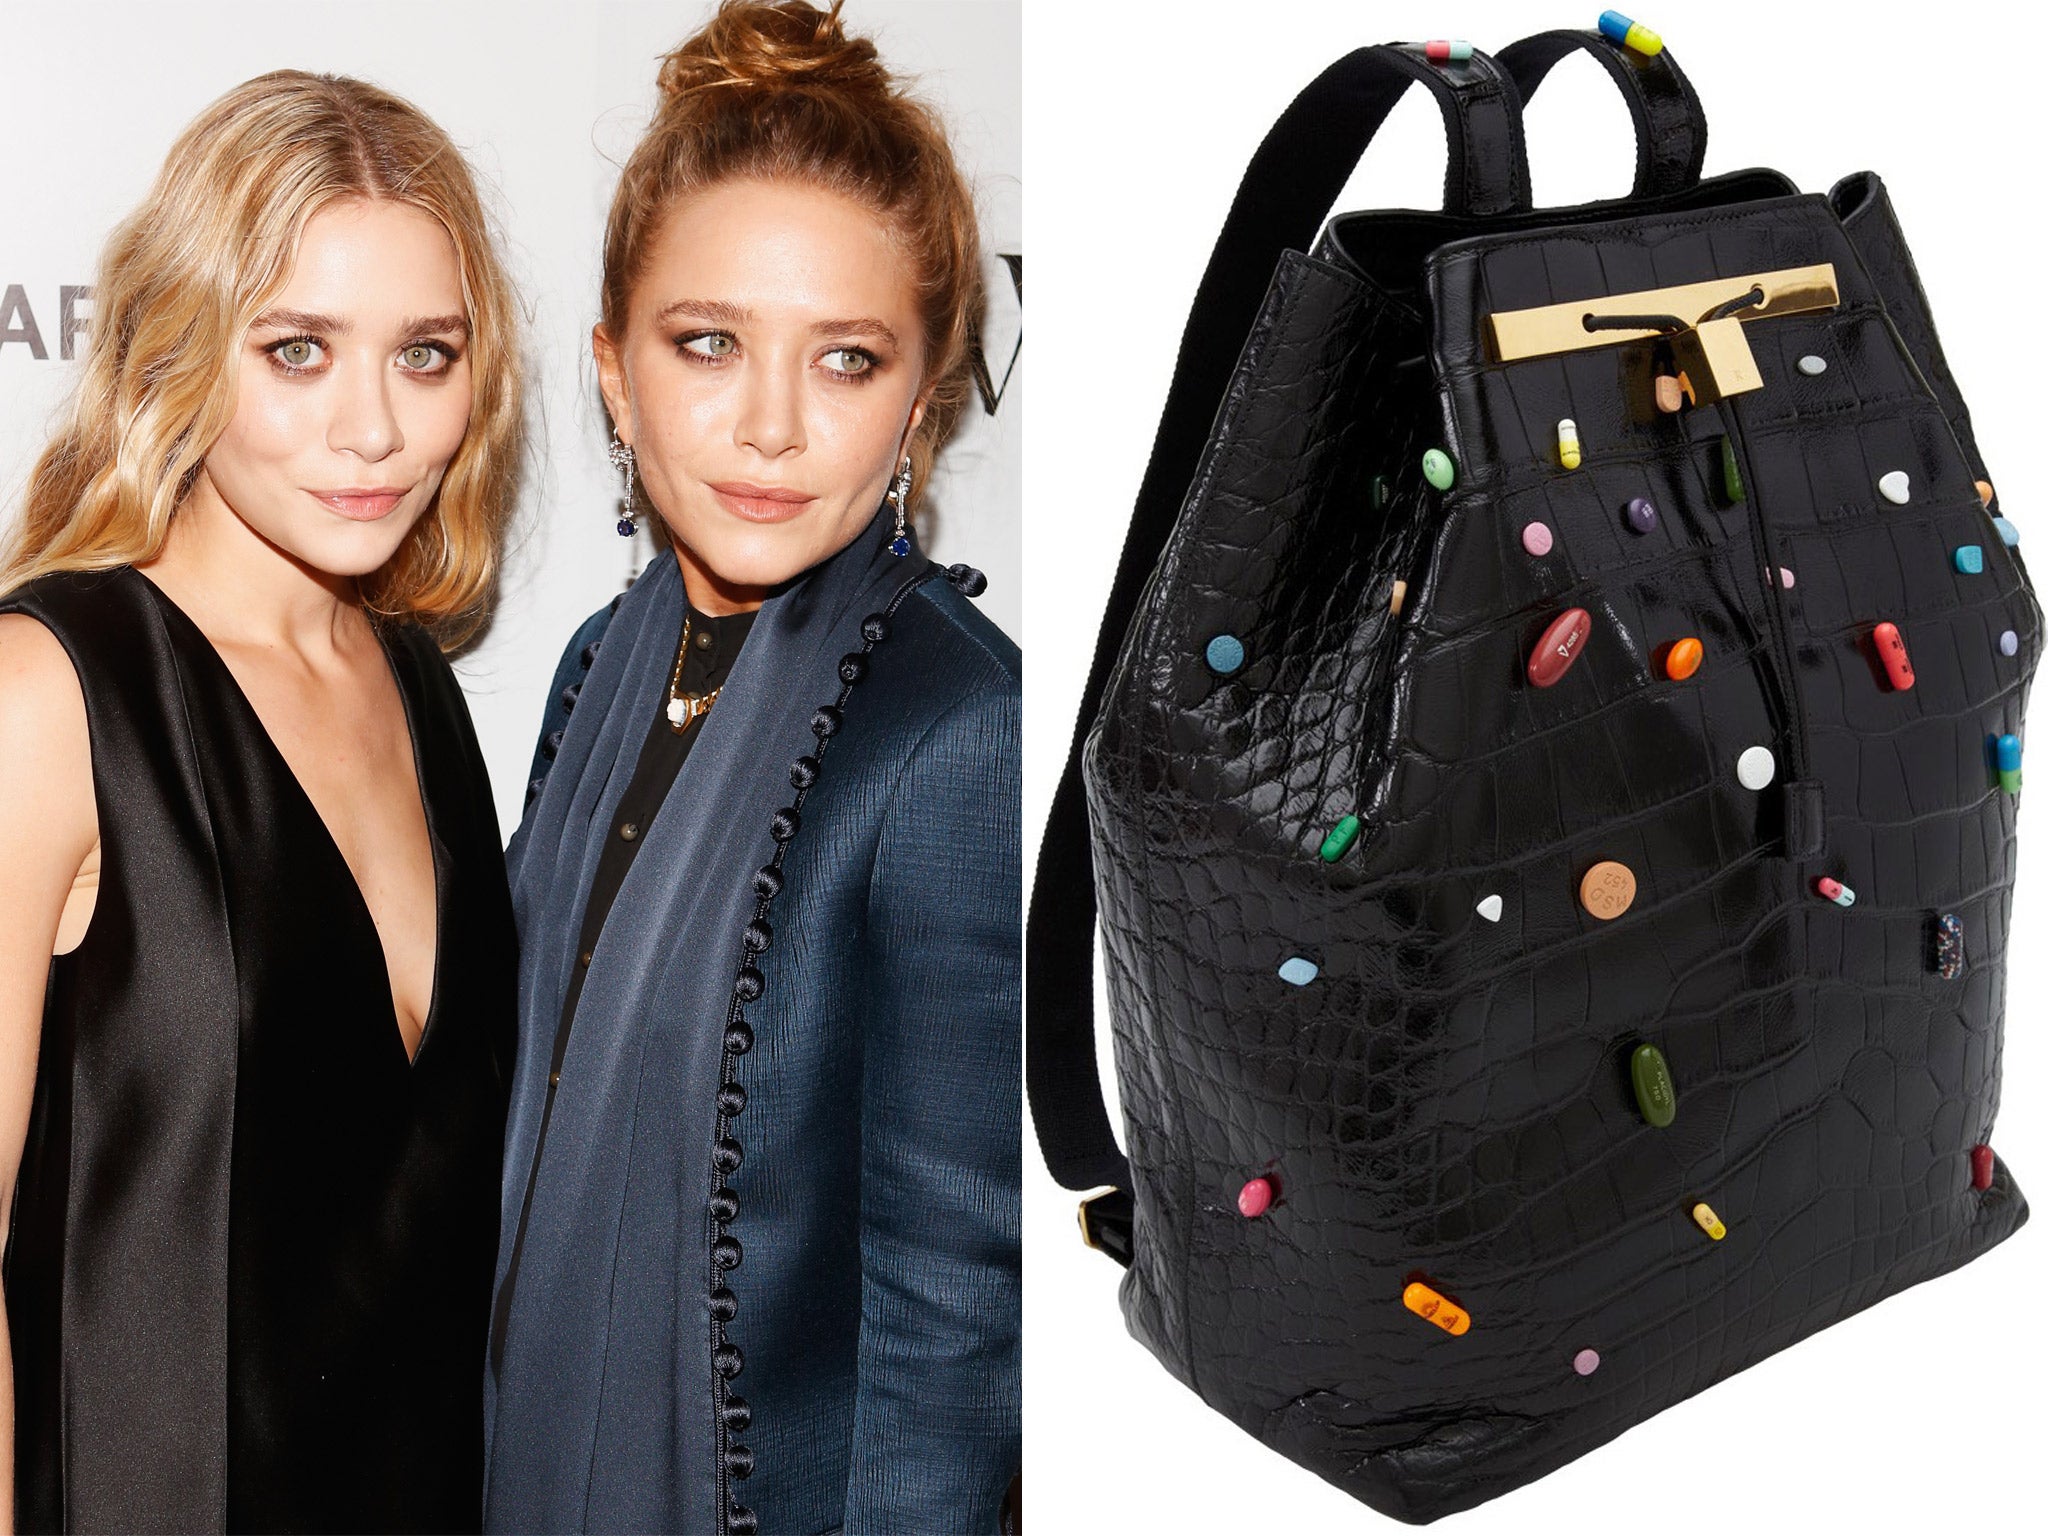 Mary Kate and Ashley Olsen, and their pricey alligator backpack